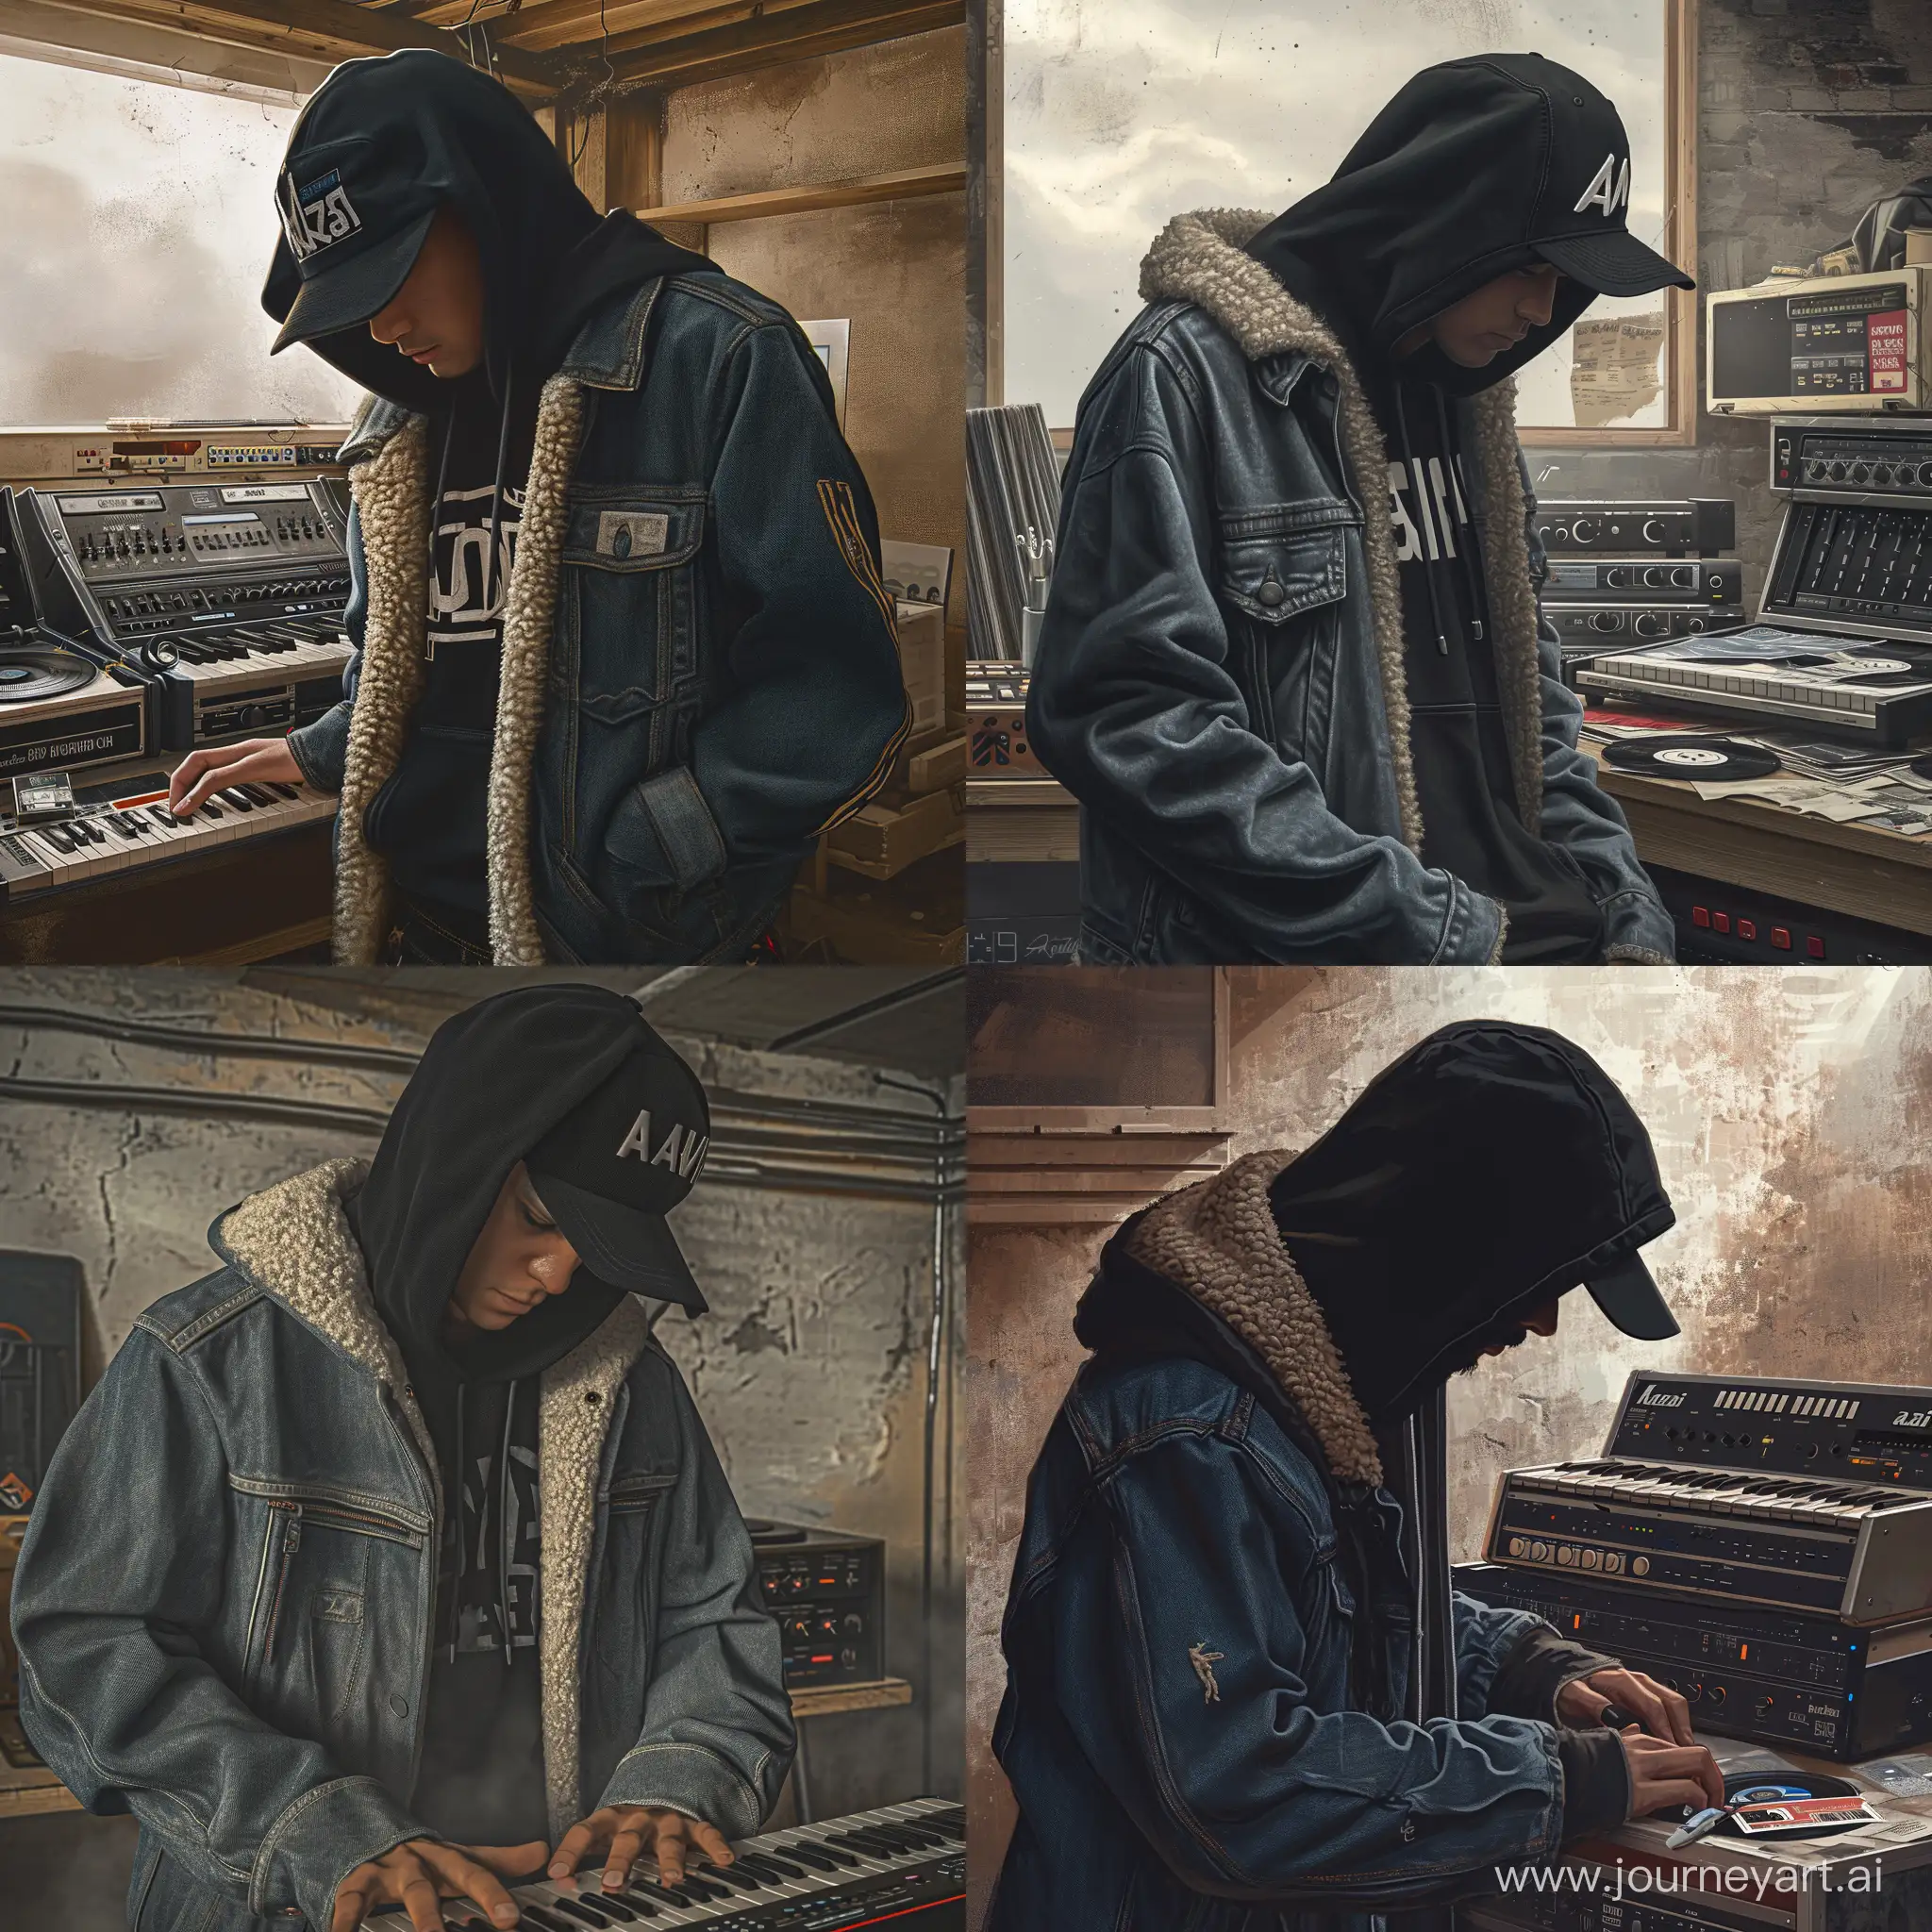 "Style: Hyperrealism. Character: A man in a black hoodie (hood not worn on the head), black snapback cap, denim 'trucker' style jacket lined with sheep's wool. Environment: A dusty music studio in a basement, featuring akai music equipment and vinyl records. Action: The character is either creating music or listening to a recording on a cassette. Lighting and colors: Natural lighting suggesting cloudy skies, with a focus on earthy and neutral denim shades. Perspective and composition: Adhering to the golden ratio, focusing on the character and their interaction with the music equipment. Negative Prompt: No neon colors, other characters, unrelated objects, bright colors, elements of fantasy or surrealism. Additional information: To be used as a hip-hop album cover, capturing an atmosphere of concentration and passion for music. Tags: #hiphop, #musicproduction, #akai, #studio, #mixtape. Notes: Emphasis on the details of the clothing and authenticity of the music equipment.